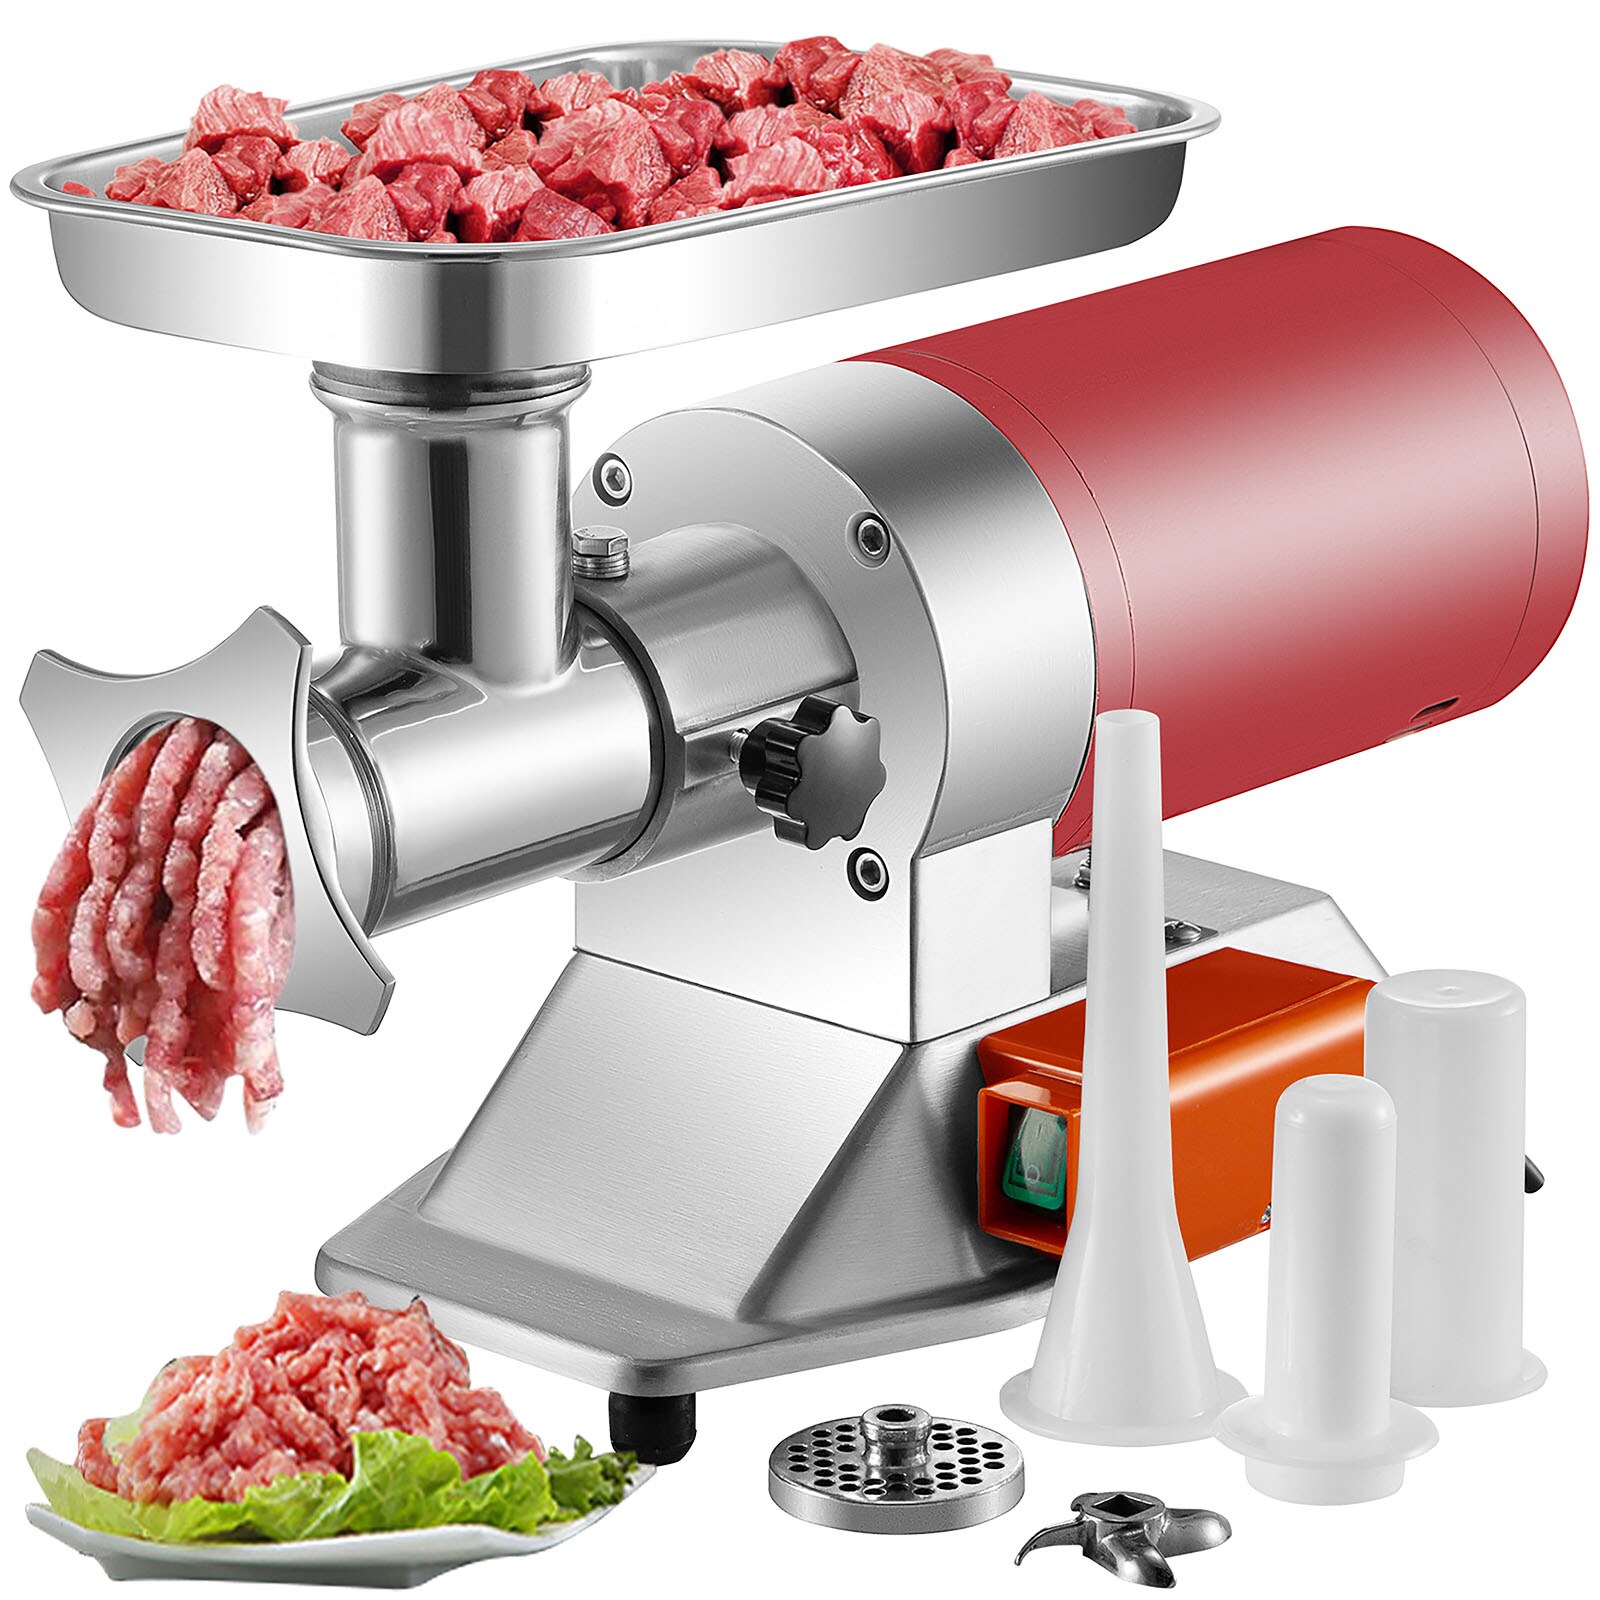  Cast Iron Table Mount Meat Grinder - Manual Mincer Includes Two  3/4 Cutting Disks and Sausage Stuffer Funnel, Heavy Duty- Make Homemade  Ground Beef Burgers, Easy to Use and Cooking Tool